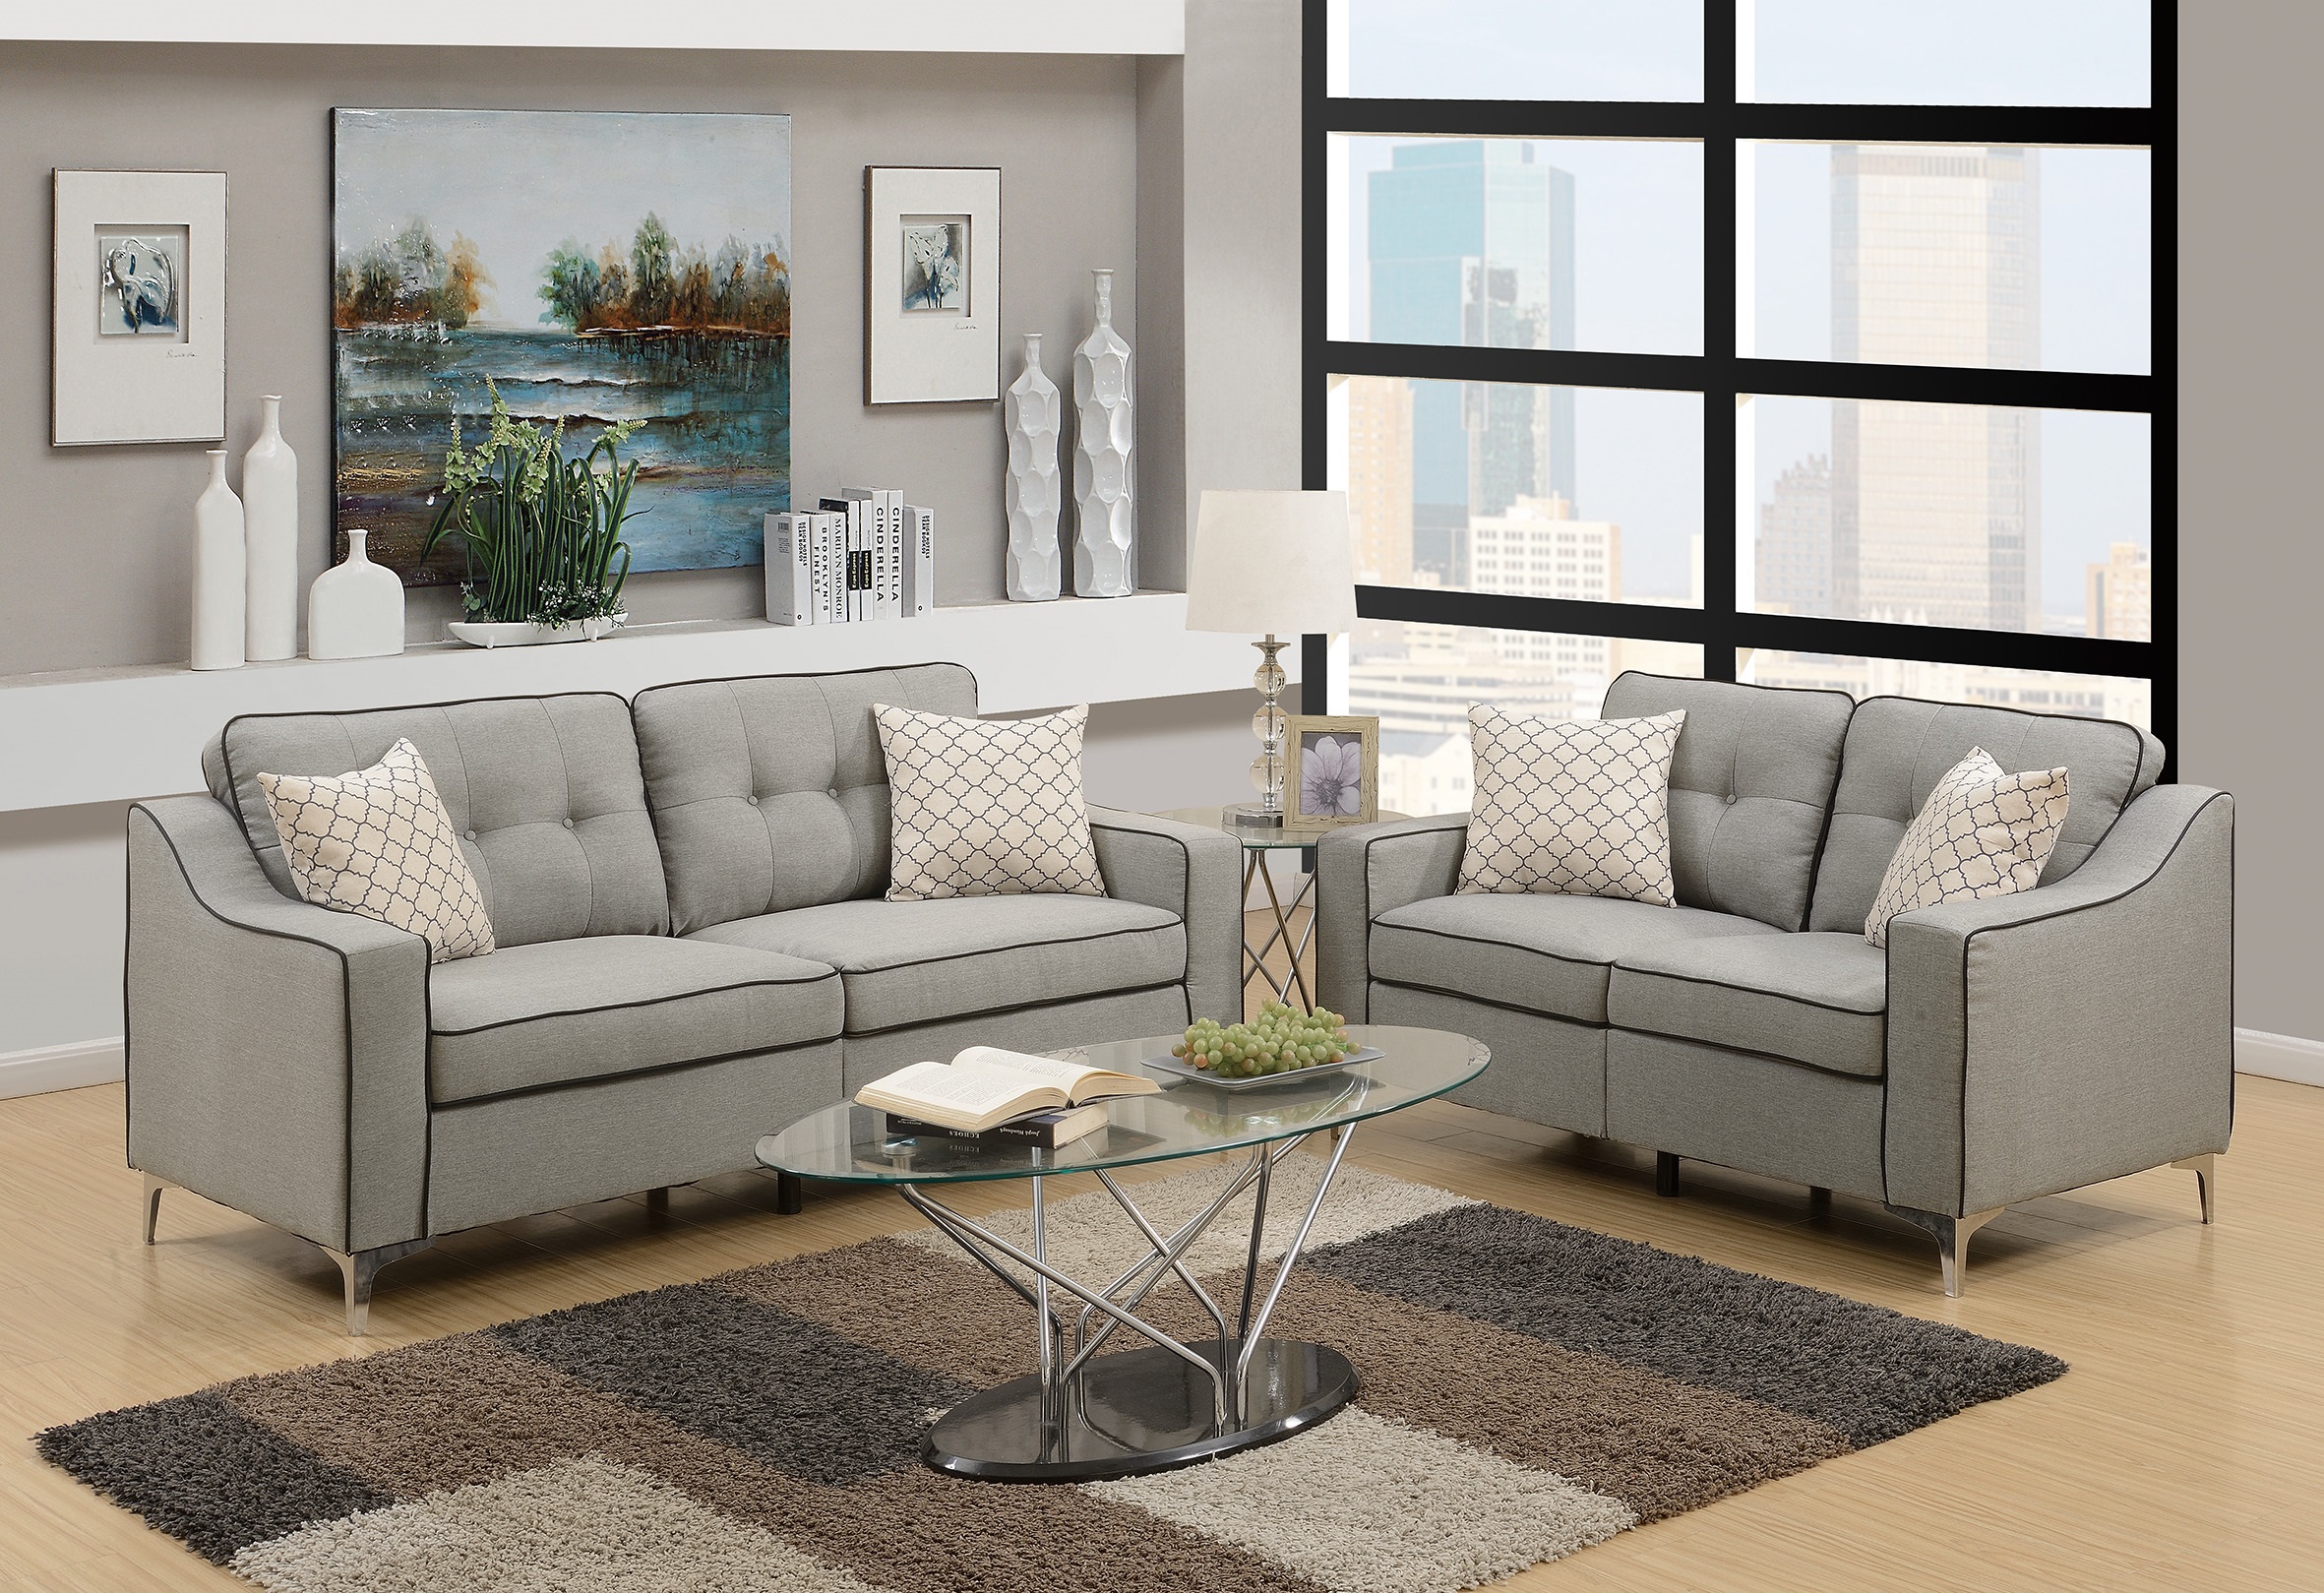 Living Room Gray Glossy Polyfber Sofa And Loveseat Furniture Plywood Metal Legs Couch Pillows 2pc Sofa set-Boyel Living